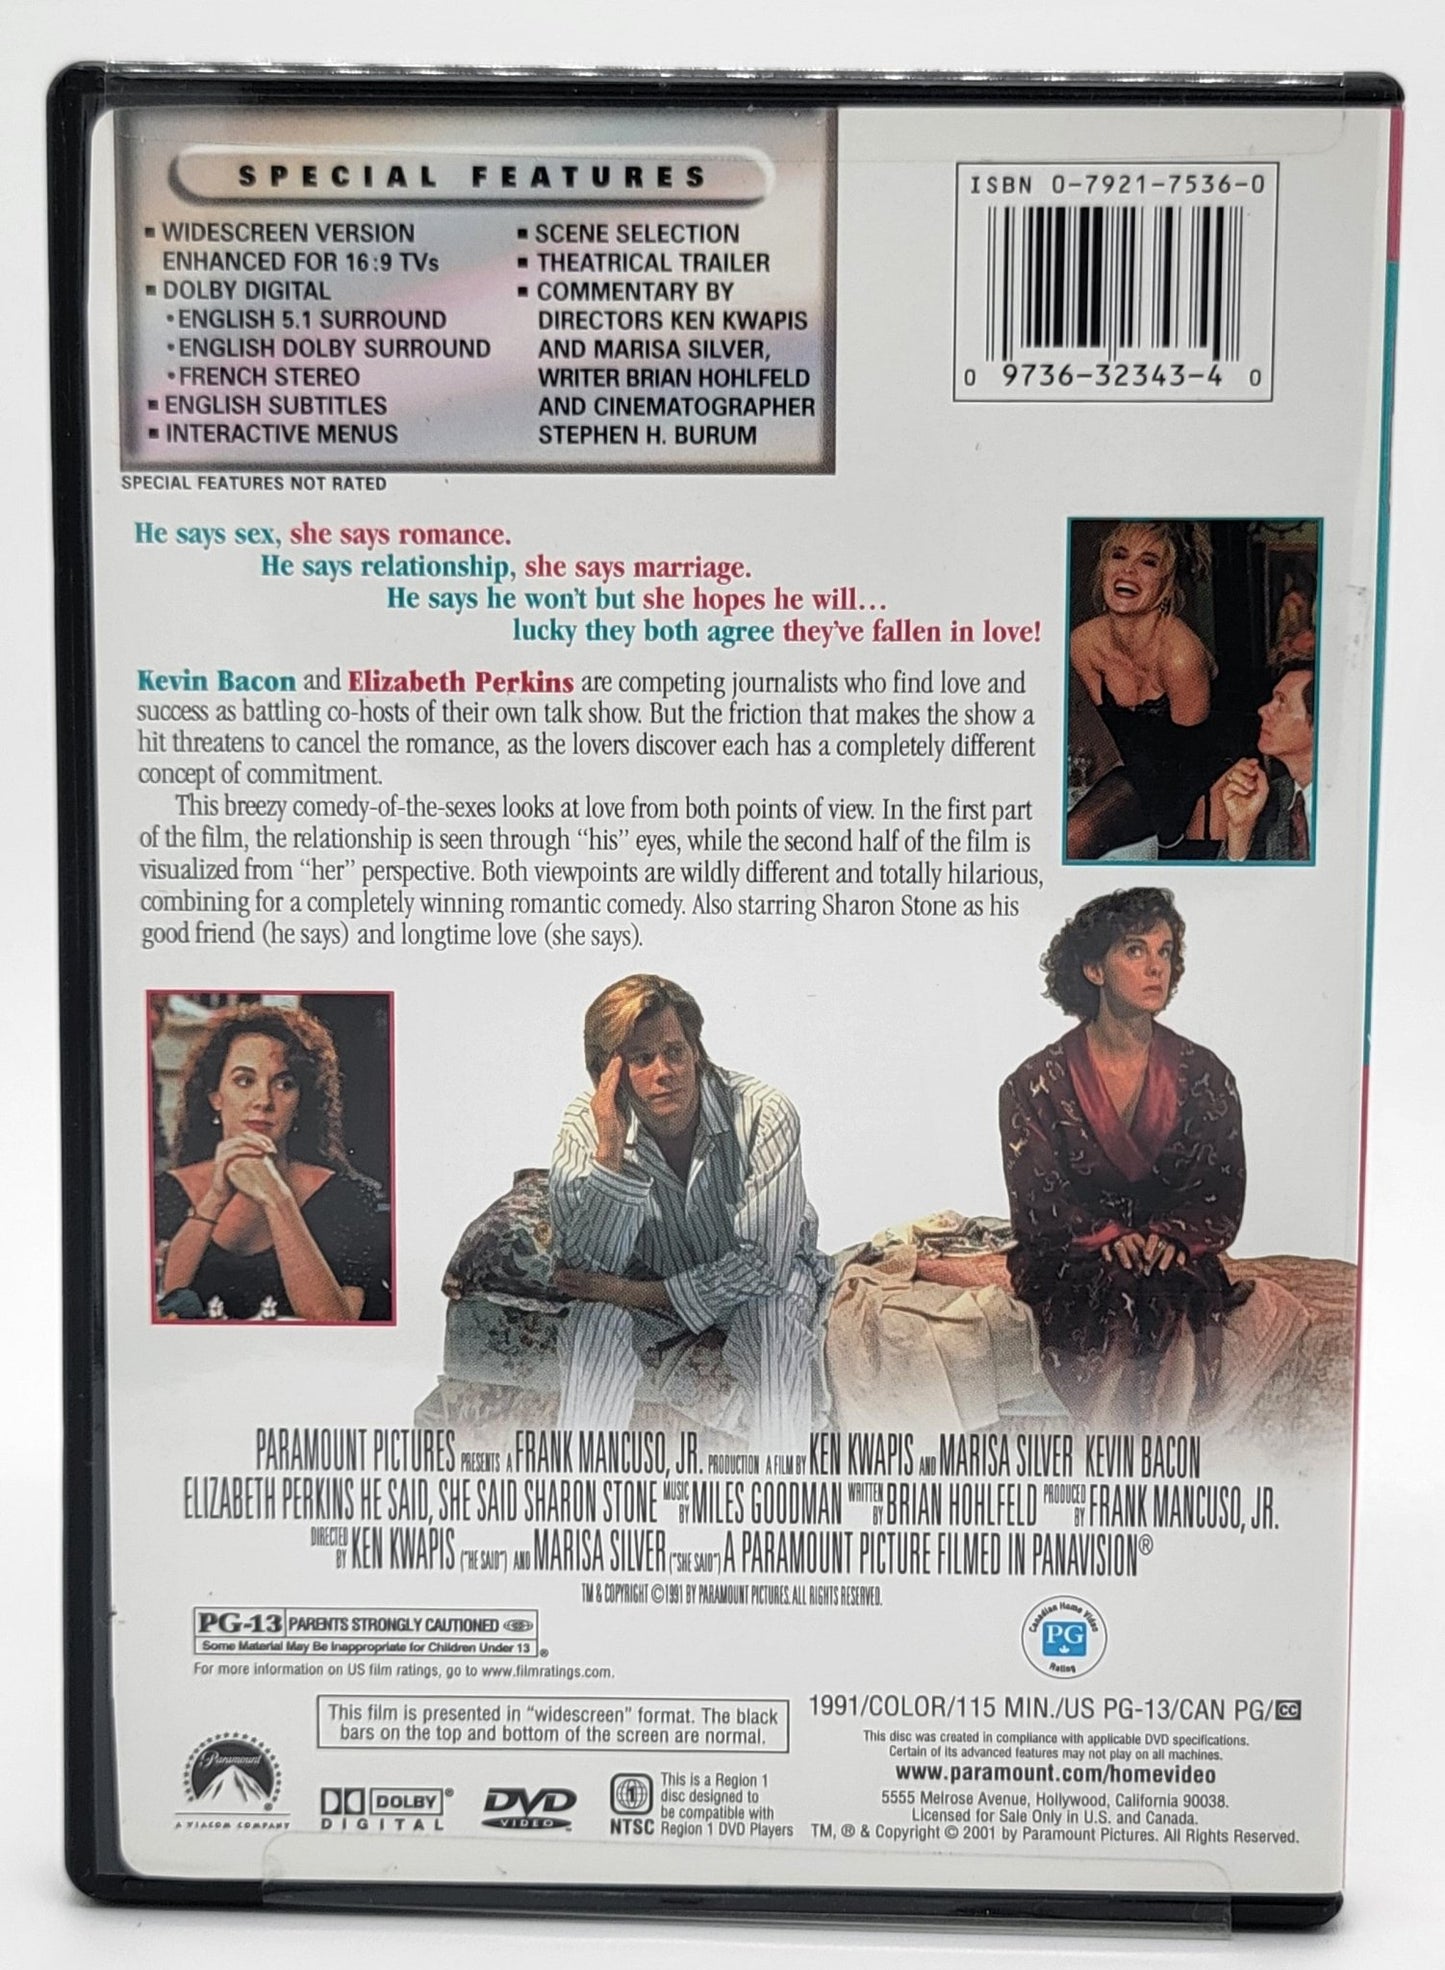 Paramount Pictures Home Entertainment - He said, she said | DVD | Widescreen - DVD - Steady Bunny Shop